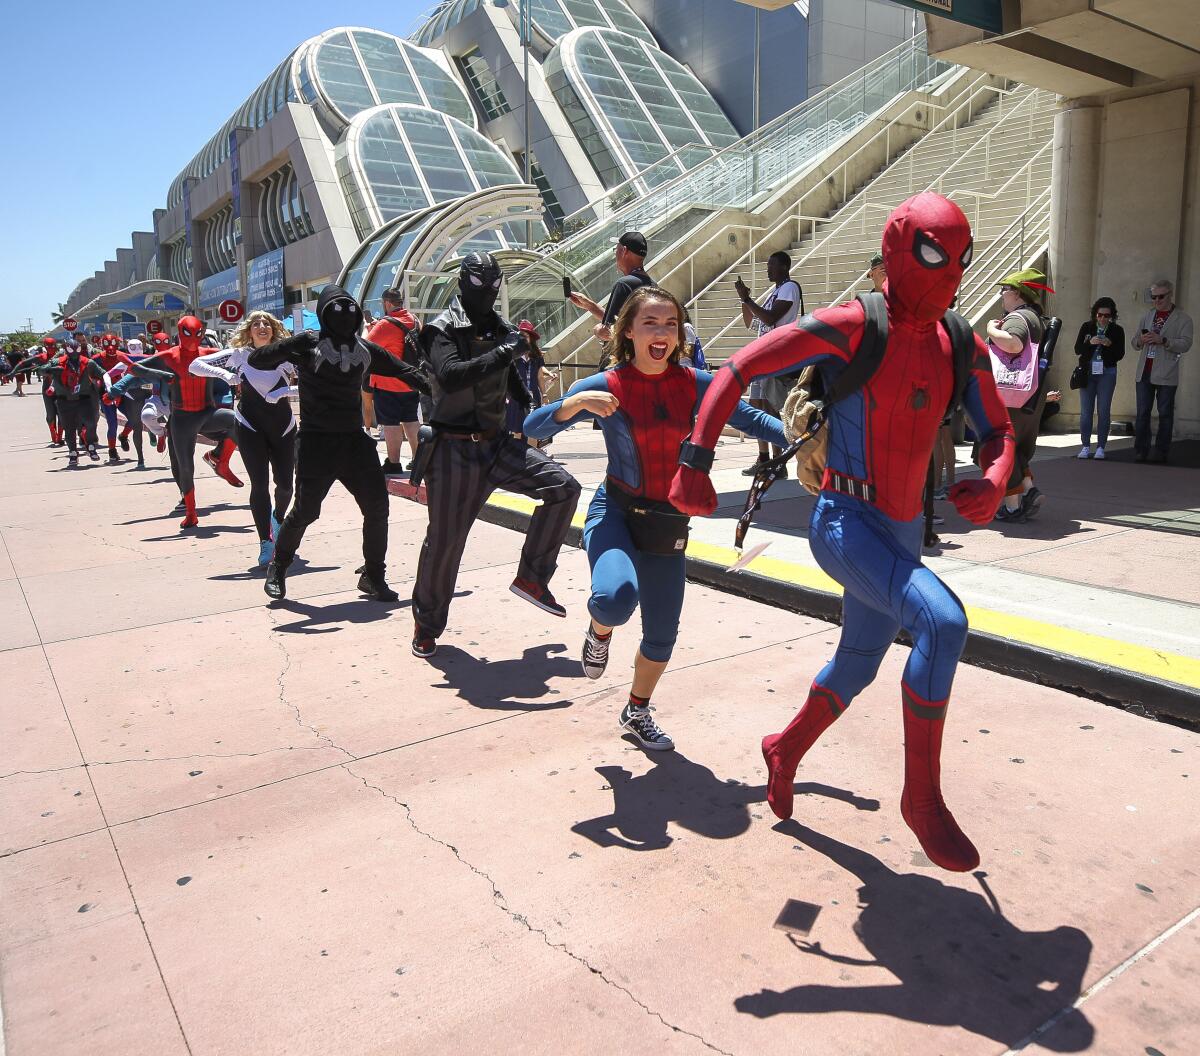 People wearing Spider-Man costumes dance in front of the San Diego Convention Center for a YouTube video.